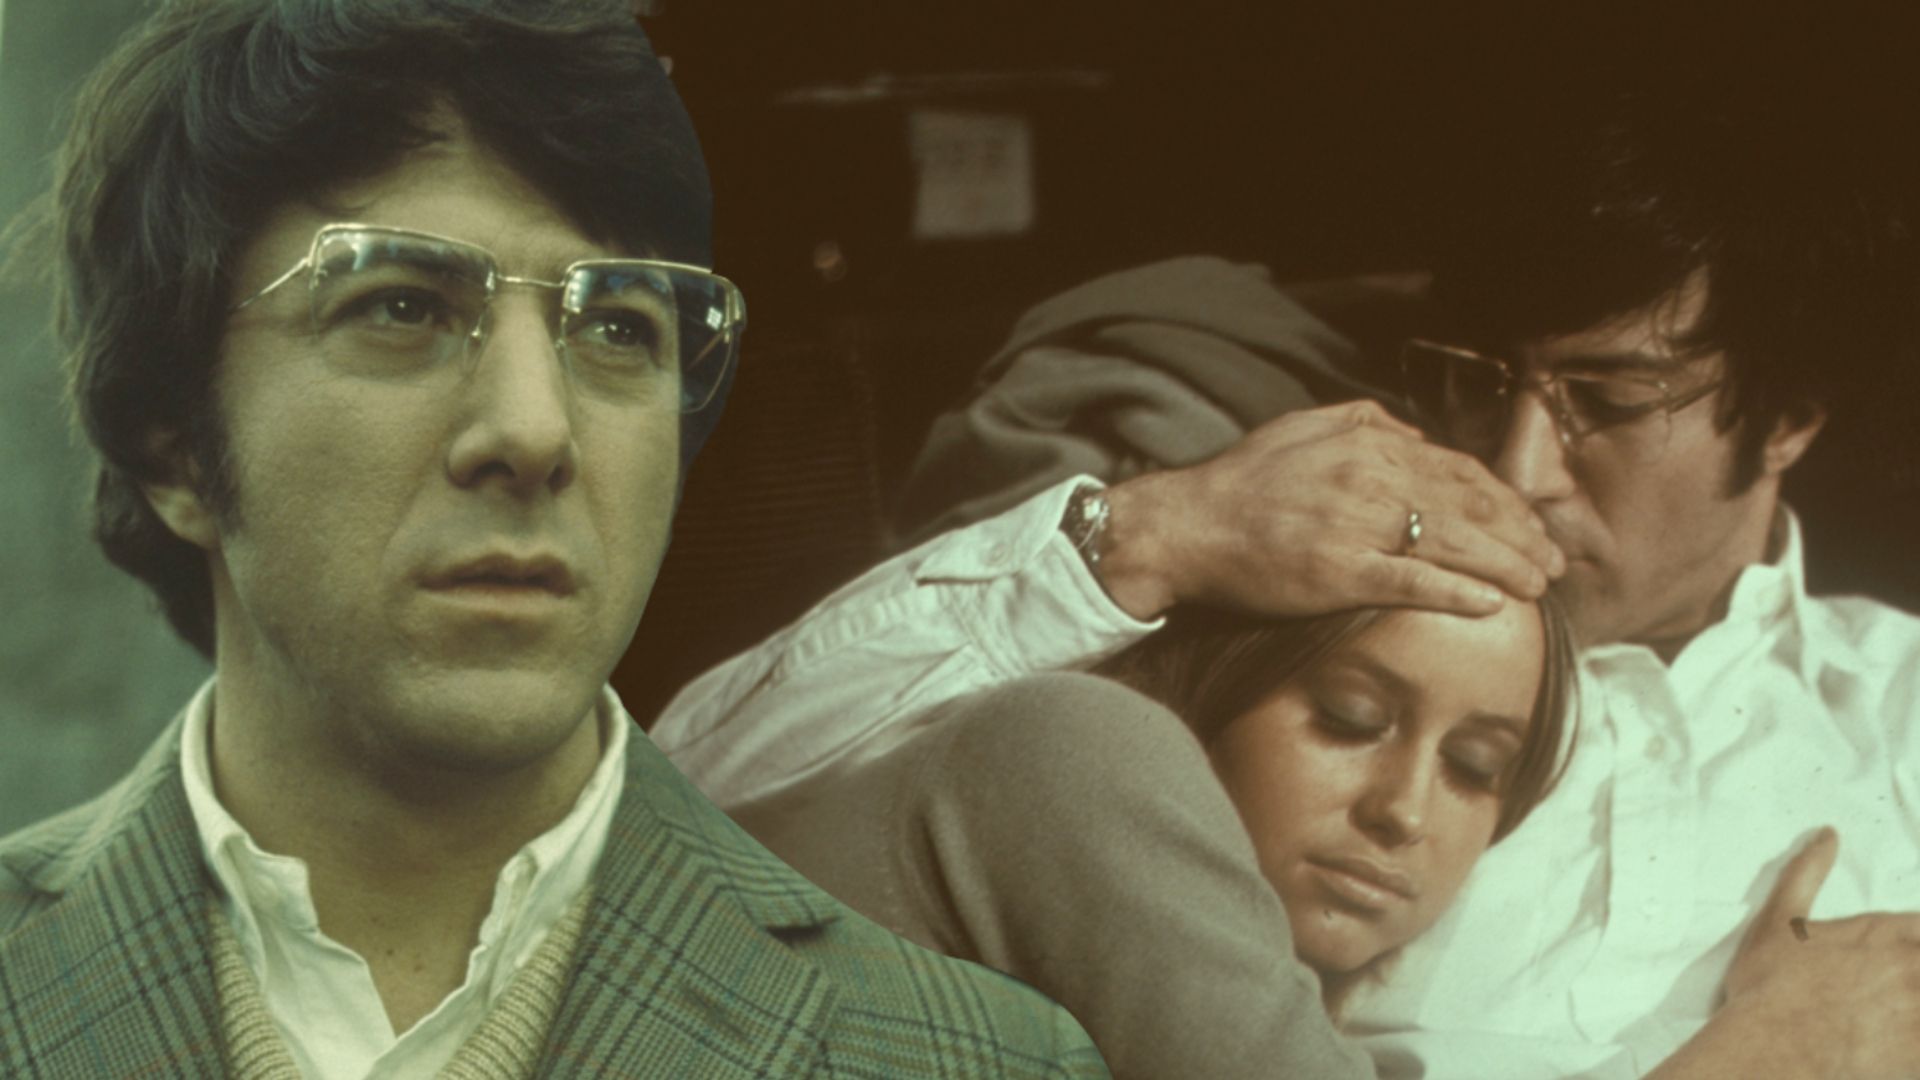 An edited image of Dustin Hoffman wearing a white collared shirt with glasses in Straw Dogs